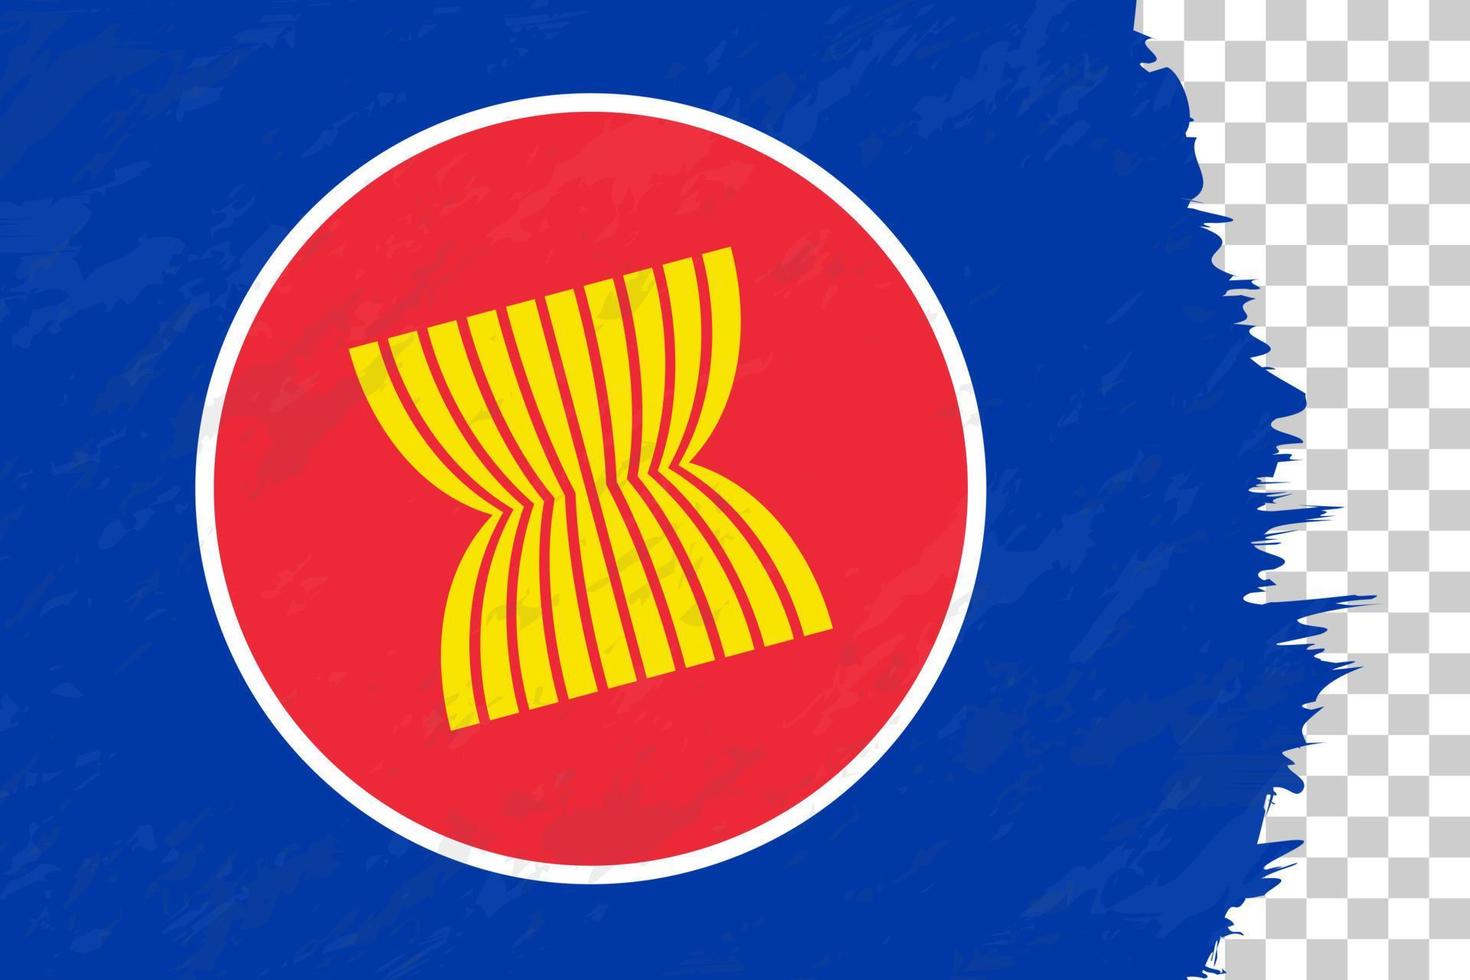 Horizontal Abstract Grunge Brushed Flag of ASEAN on Transparent Grid. vector